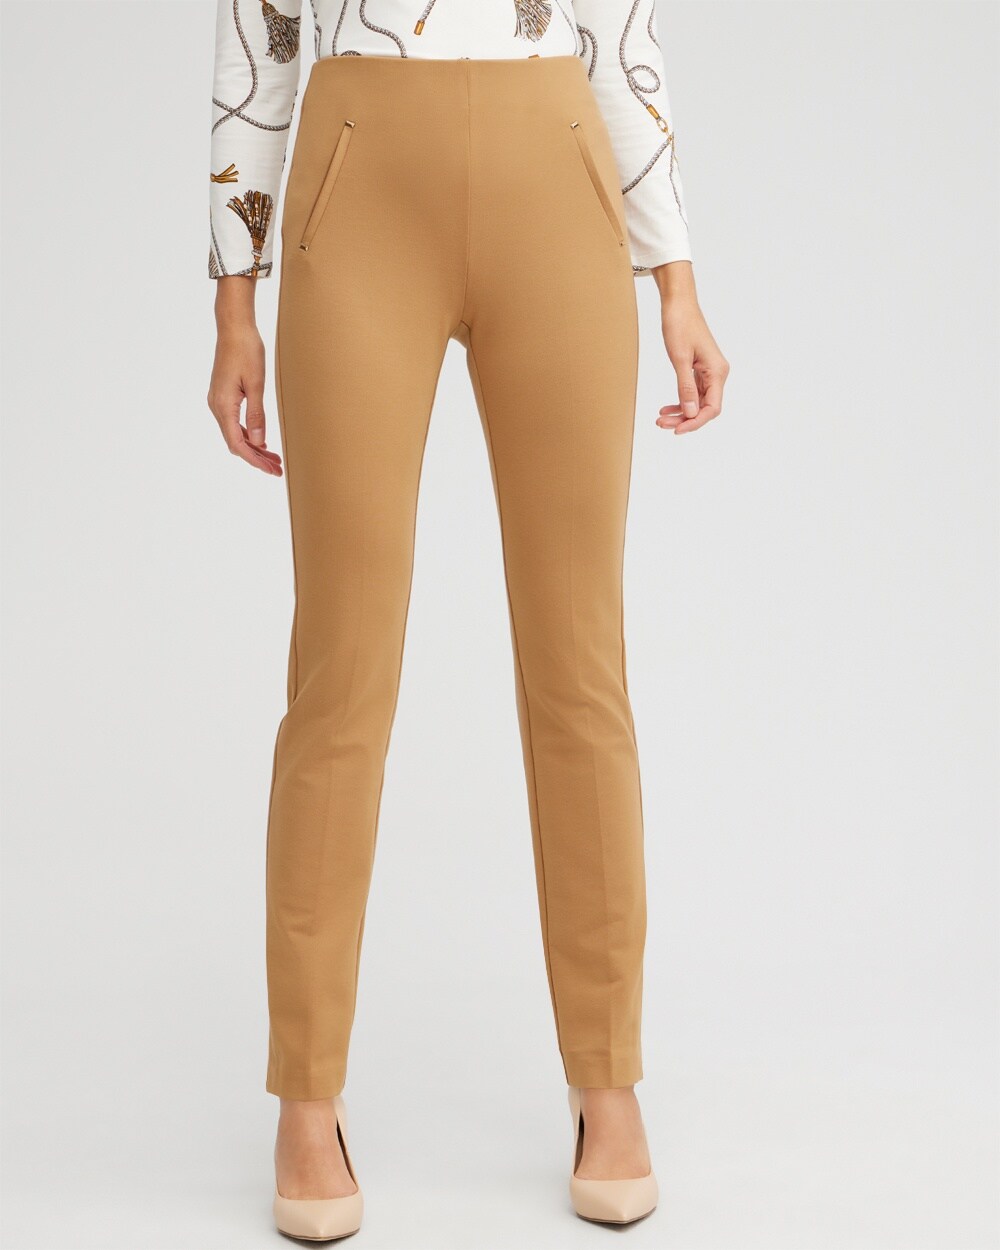 Xpose - These new camel toe pants are arriving at Xpose next week. Place  your orders now so not to be disappointed.